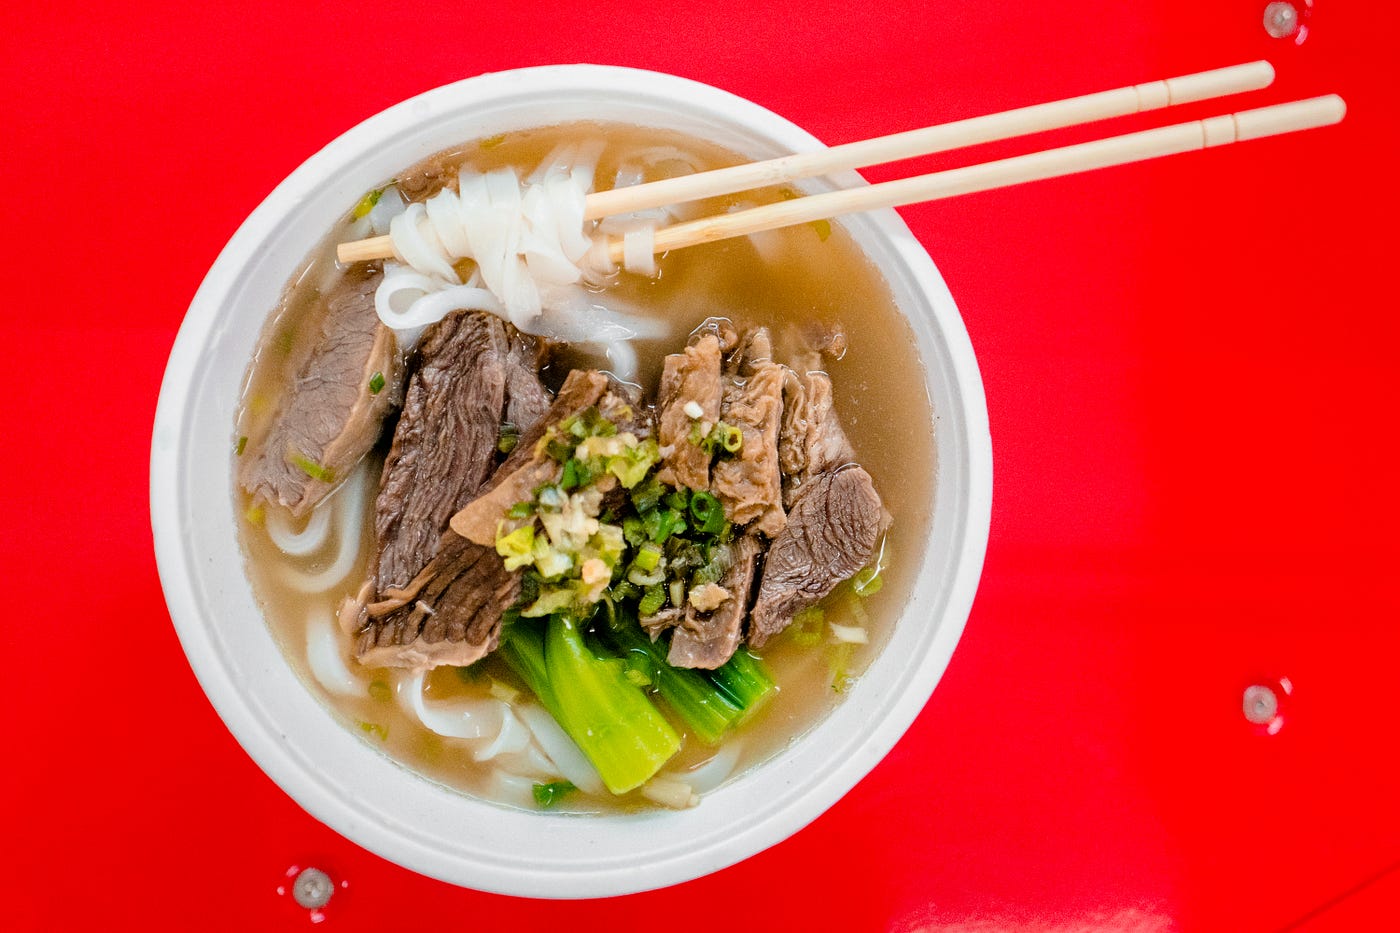 White bowl with meat, vegetables, and noodles. Two chopsticks are perched on the bowl at the two o’clock position. Red background.